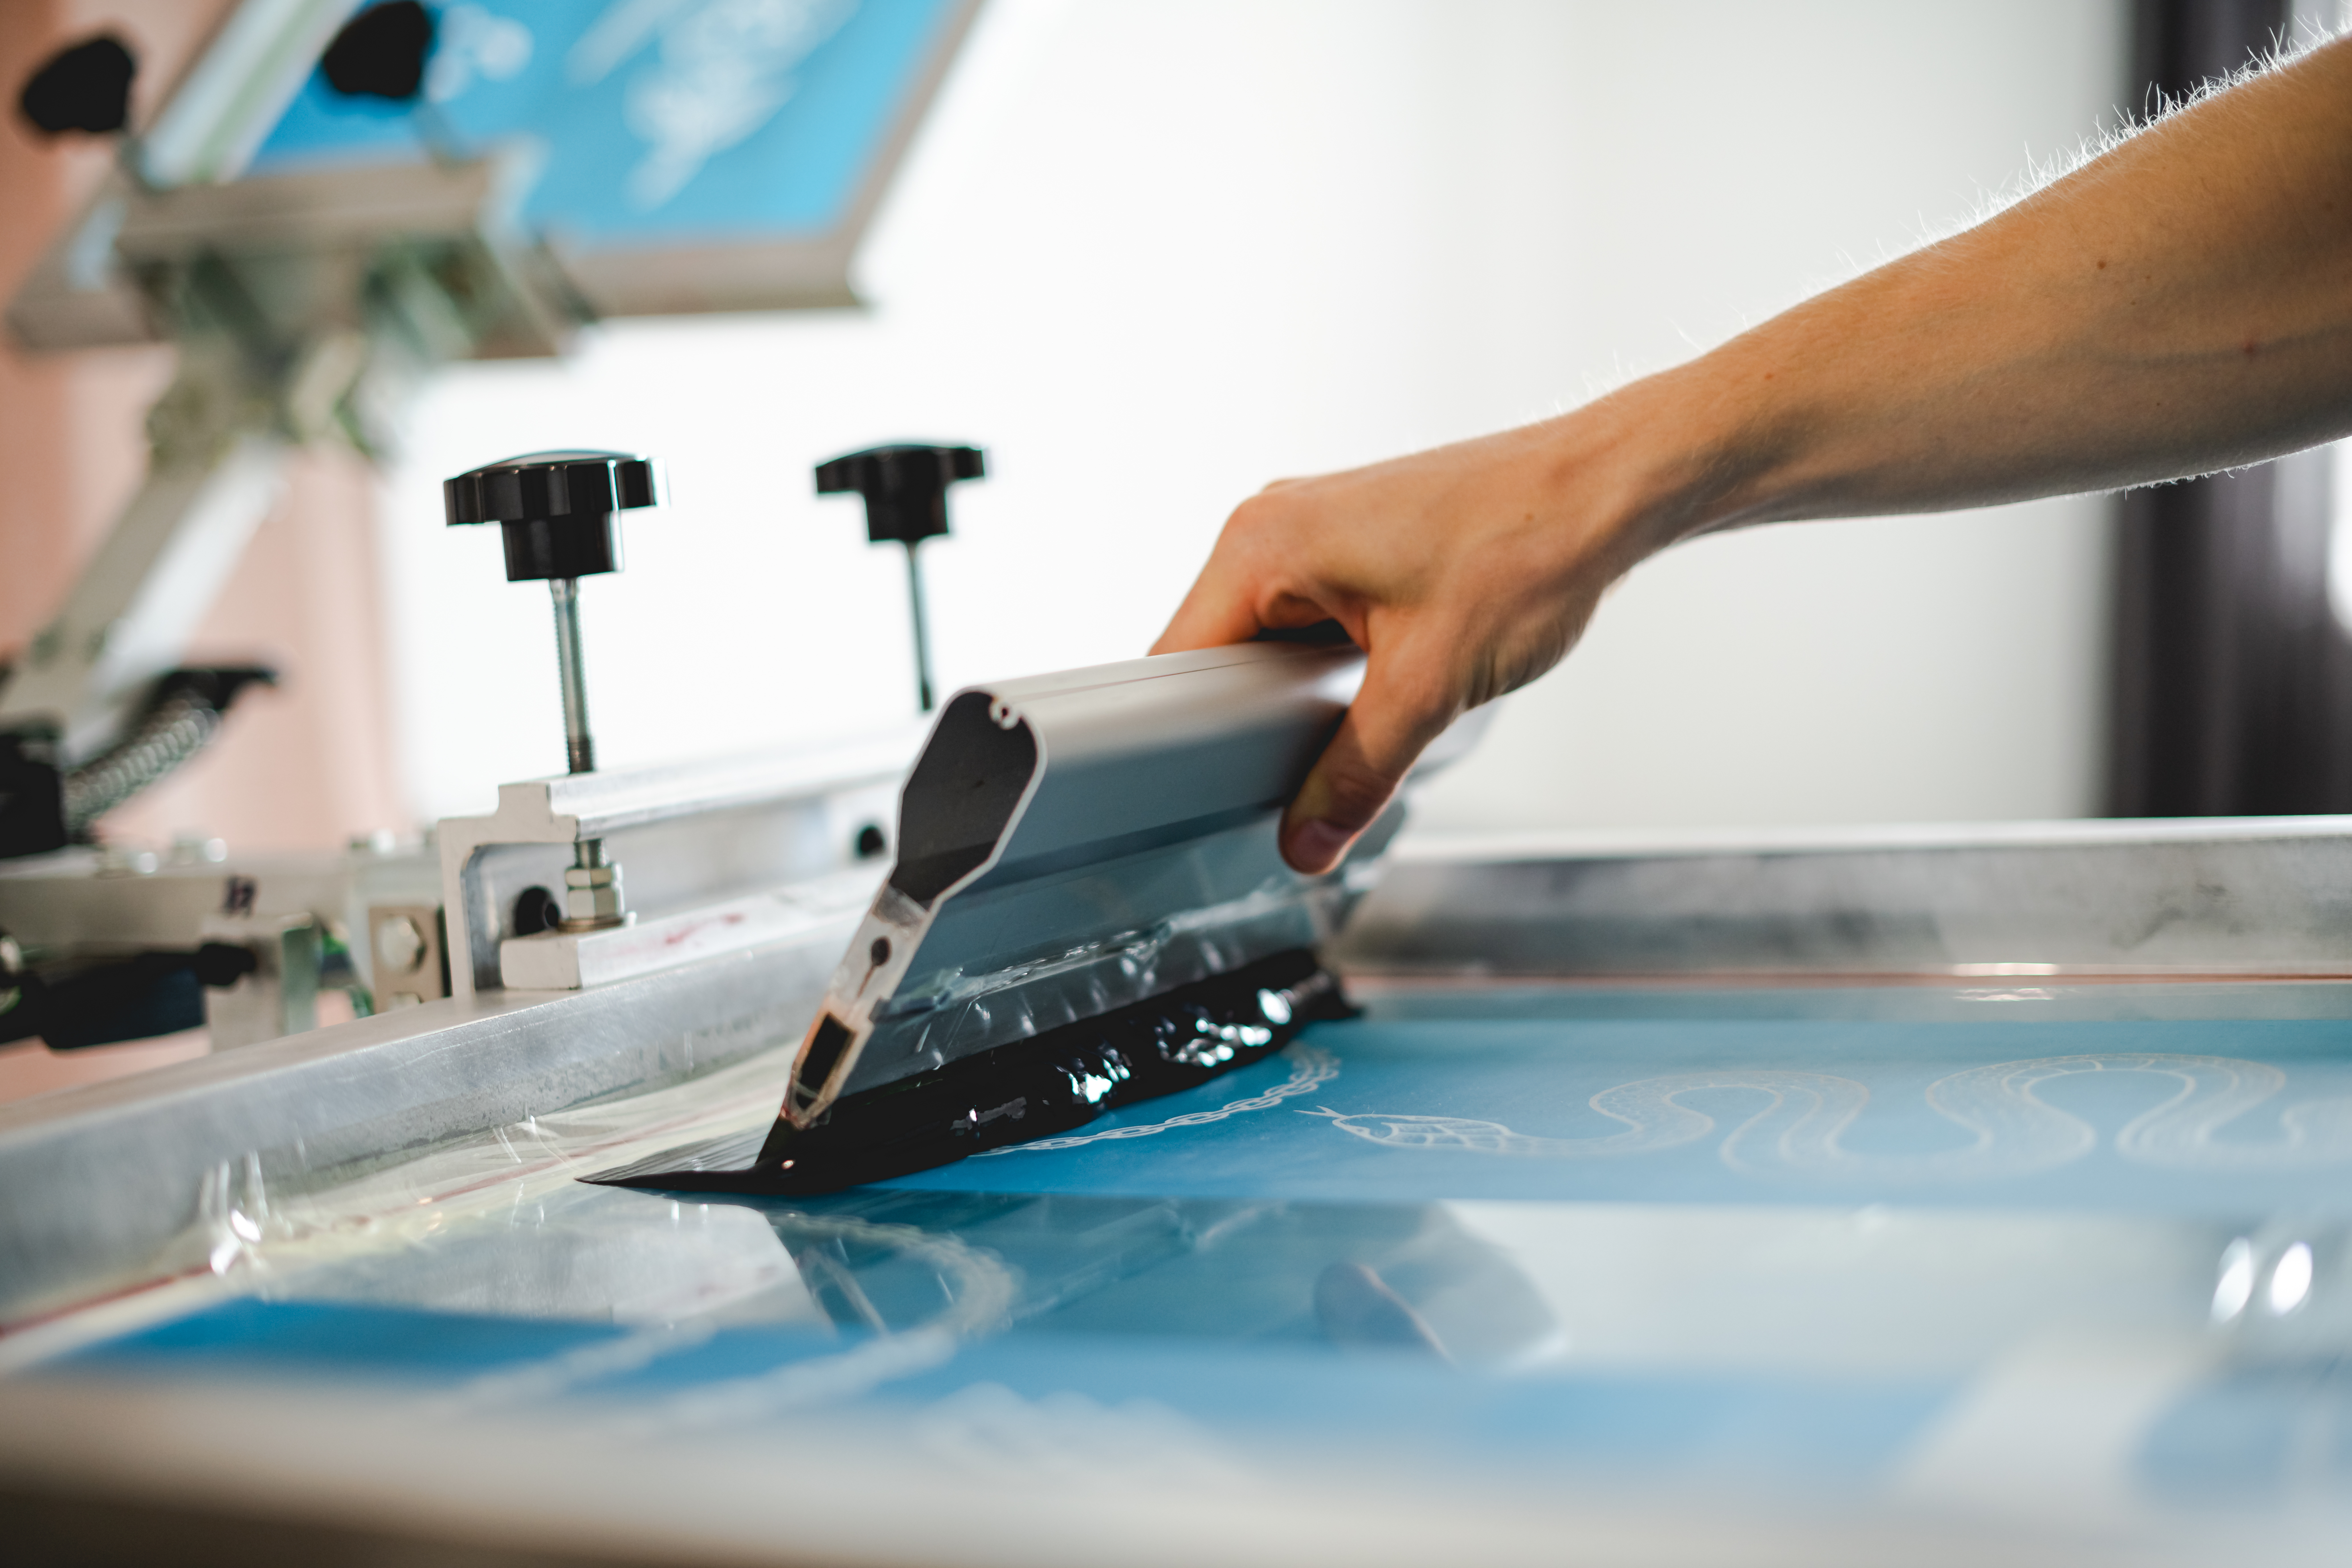 A person is screen printing something with blue ink.